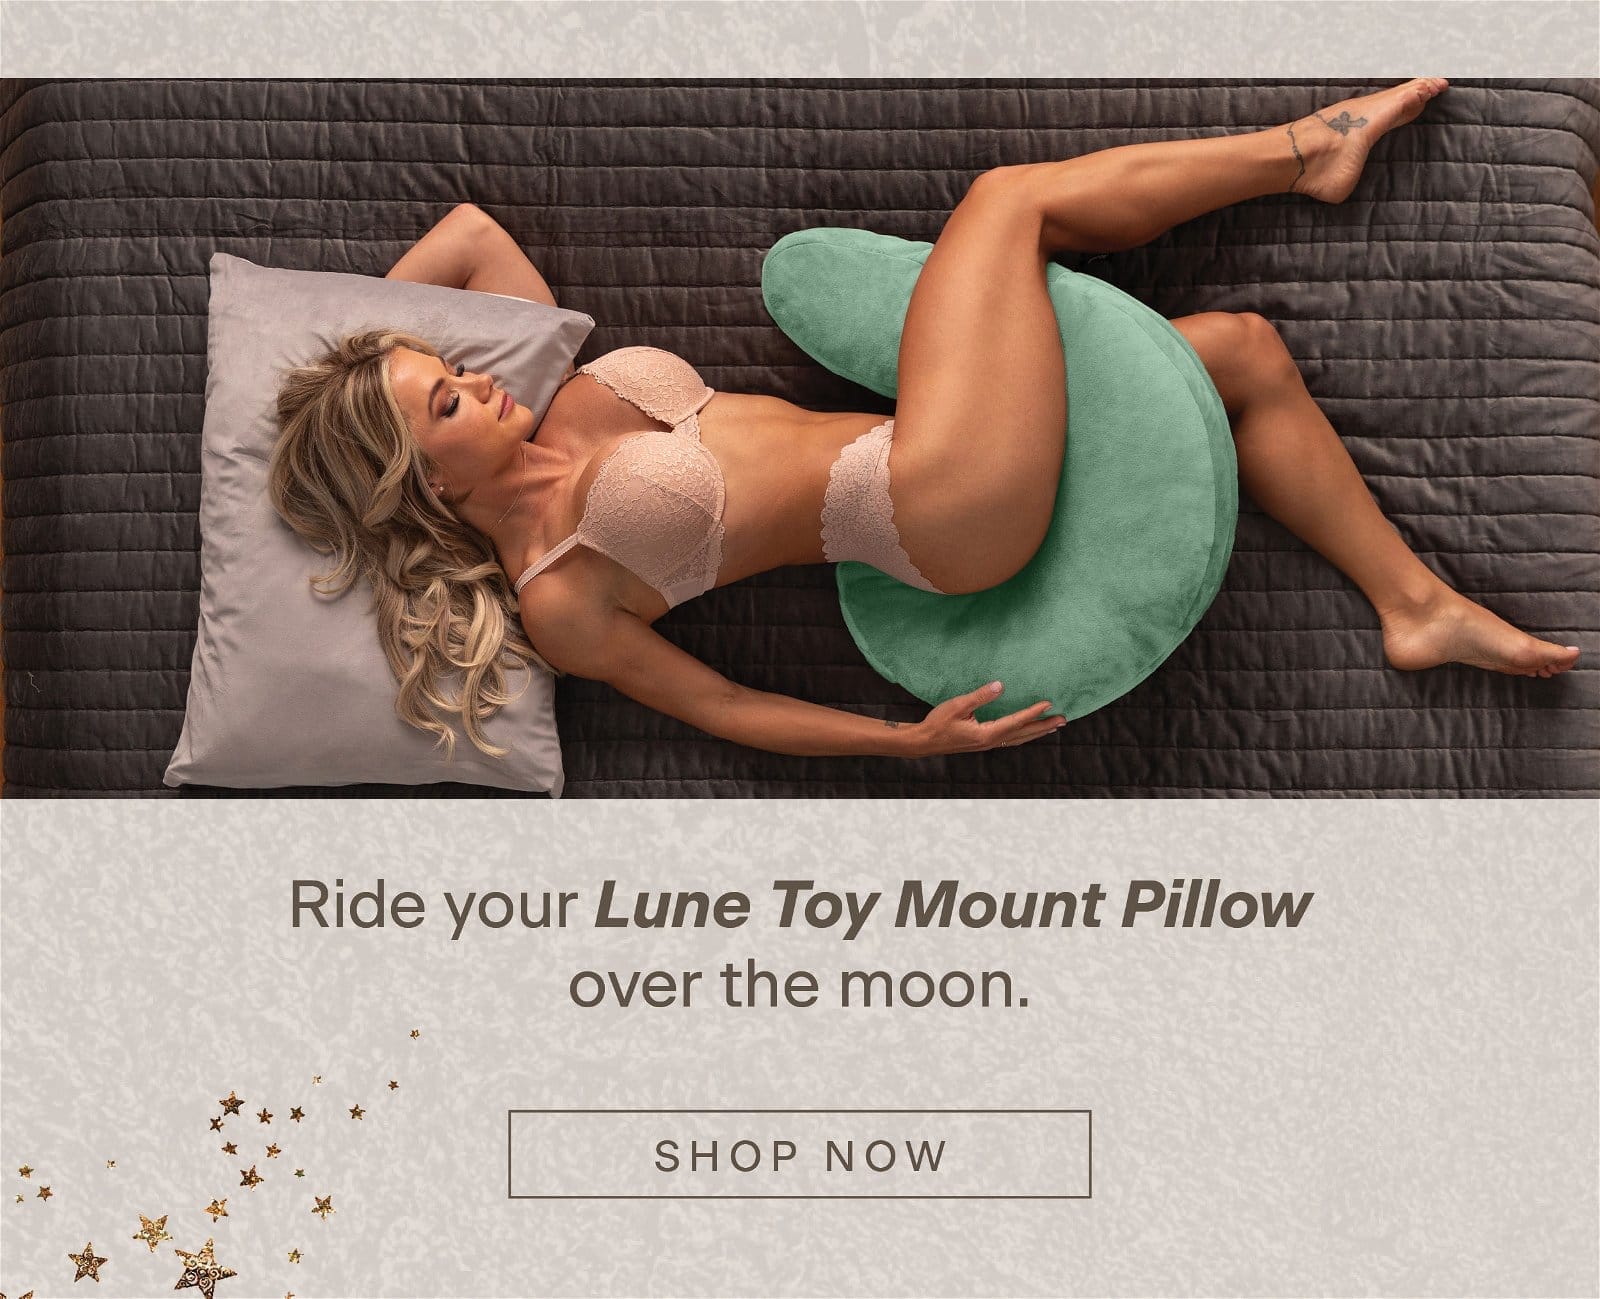 Lune – Ride your Lune Toy Mount Pillow over the moon and snuggle it all night long.